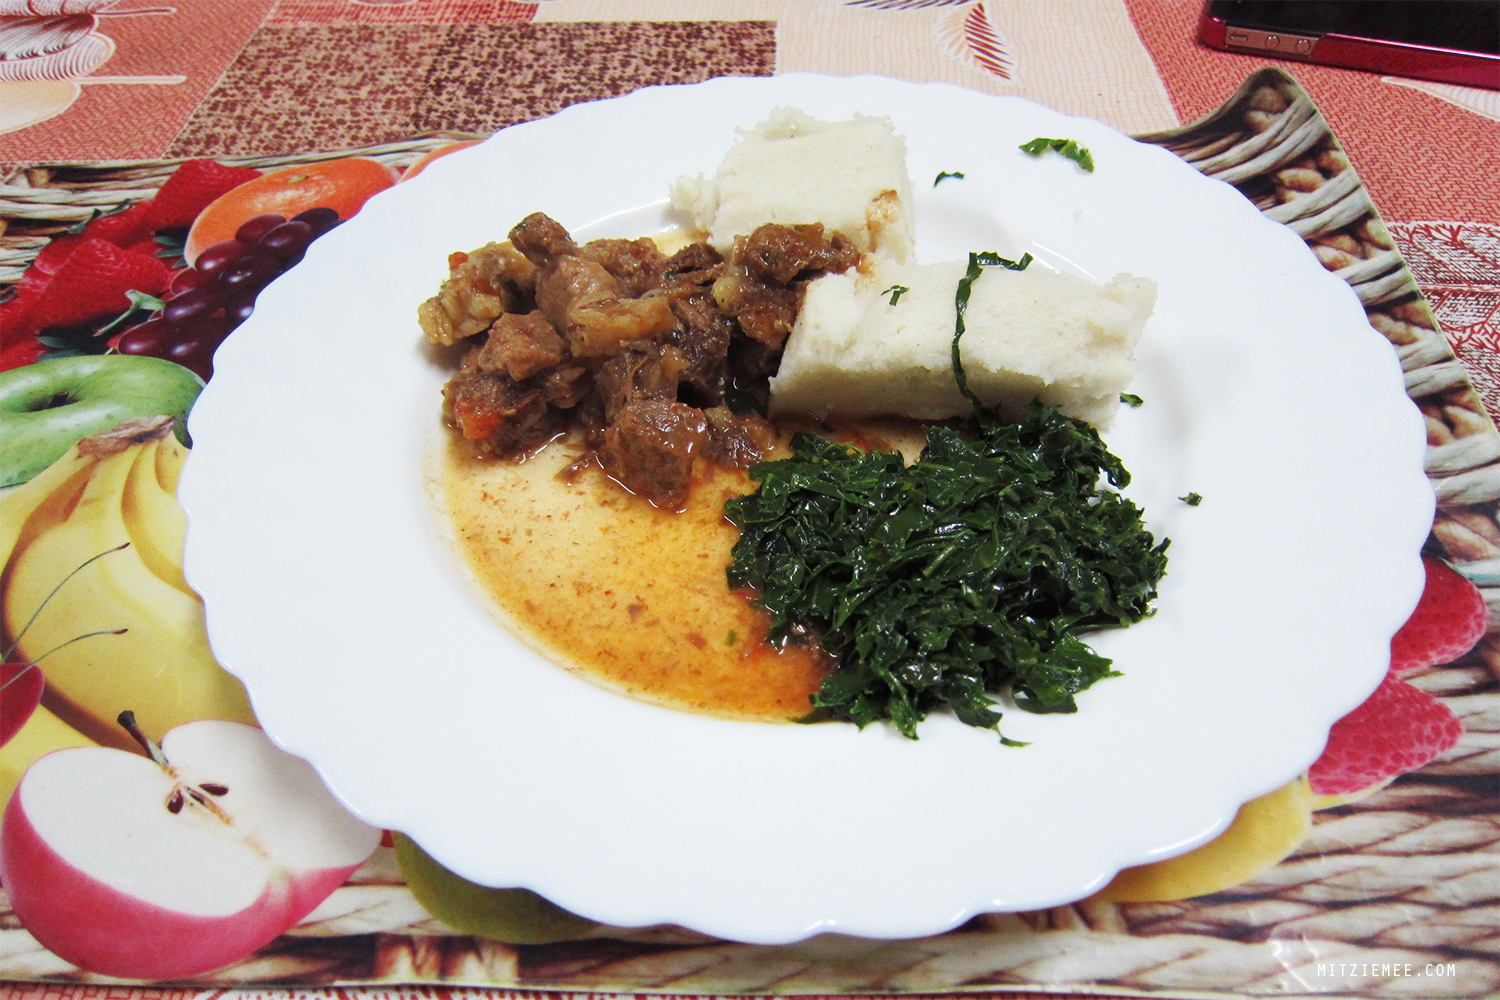 Stew with ugali (made from maize flour) and sukuma wiki (spinach)